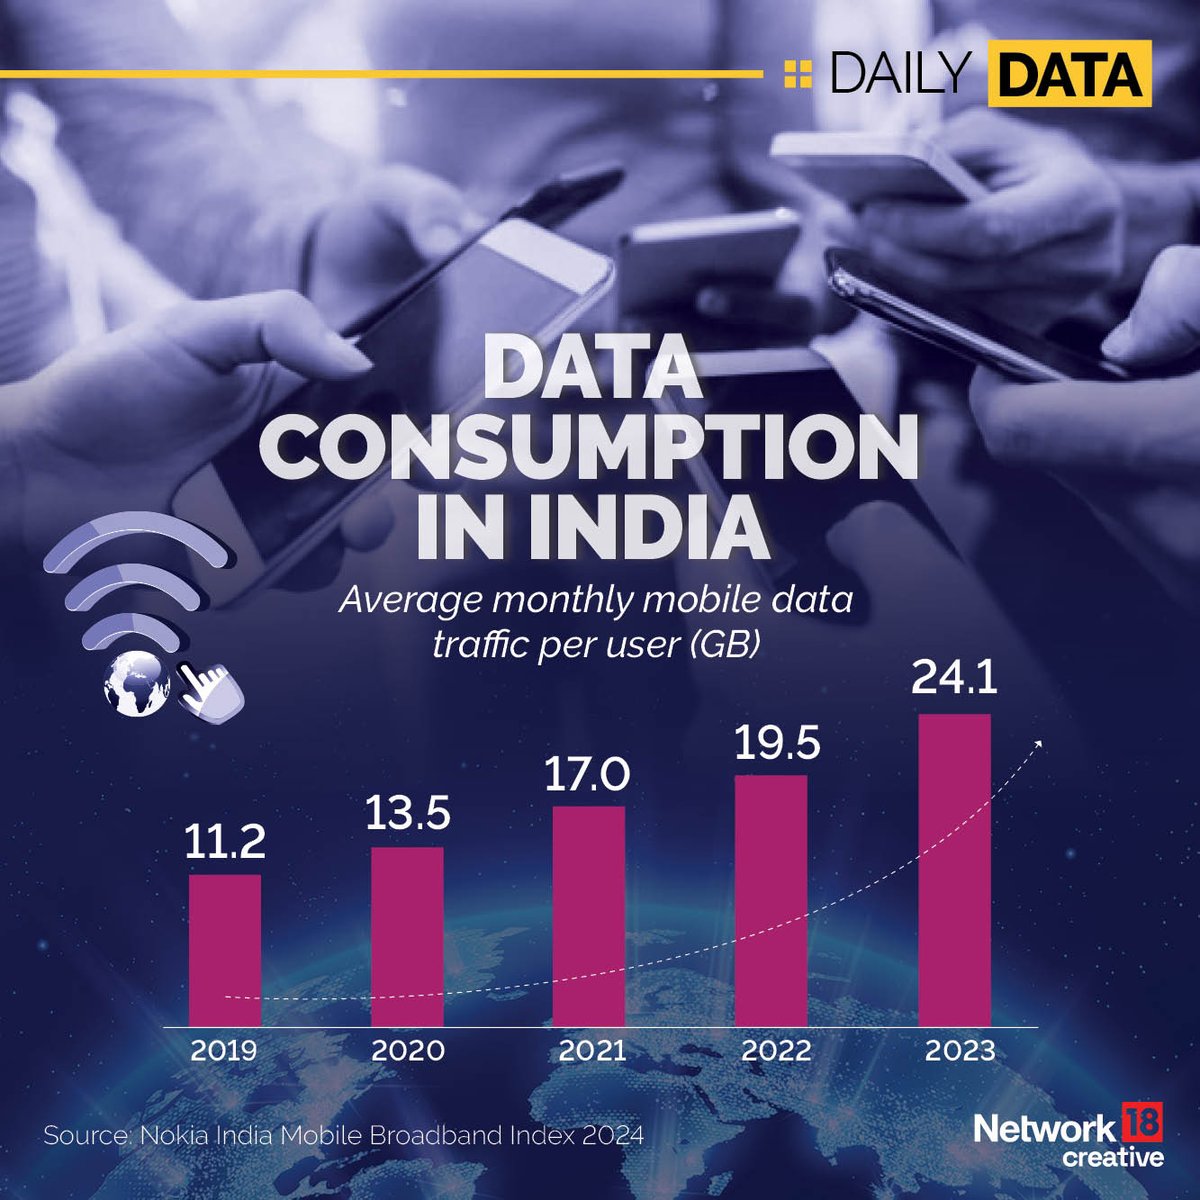 According to recent data, the average data consumption per user in India has been steadily increasing over the past few years.
Average 24.1 GB per month 😮
Tell yours?
#Data #MobileData #Consumer #DataConsumption